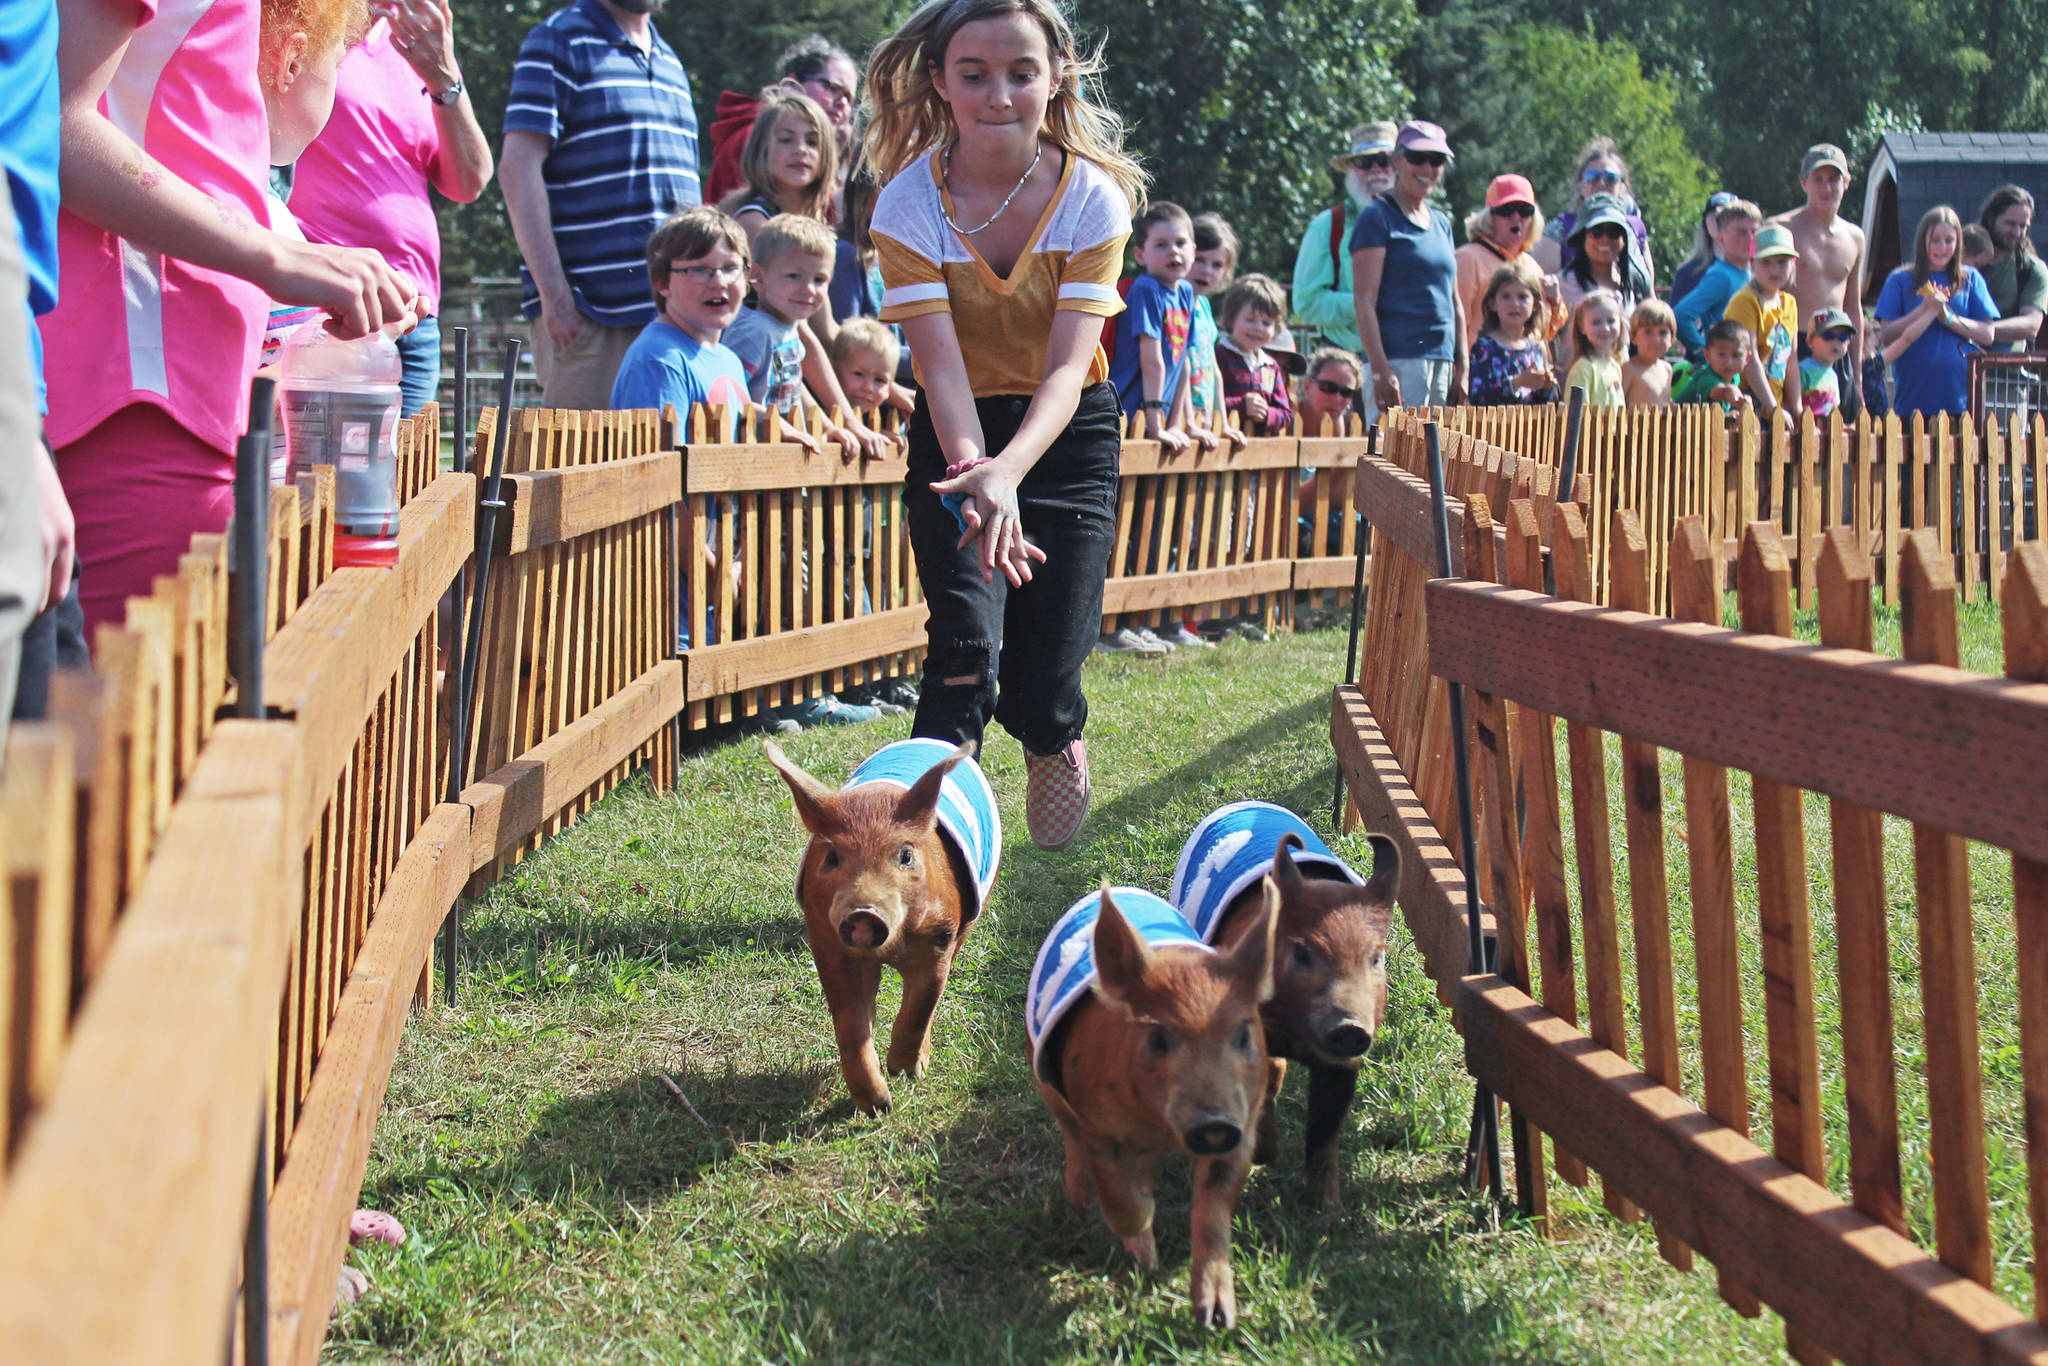 A young volunteer chases three piglets named Mary Hamkins, Petunia and Sir Oinks-a-lot through the race Kenai Peninsula Fairgrounds during the pig races on Friday, Aug. 16, 2019 in Ninilchik, Alaska. Spectators place bets on their favorite swine to win and the proceeds go to support the fair. (Photo by Megan Pacer/Homer News)